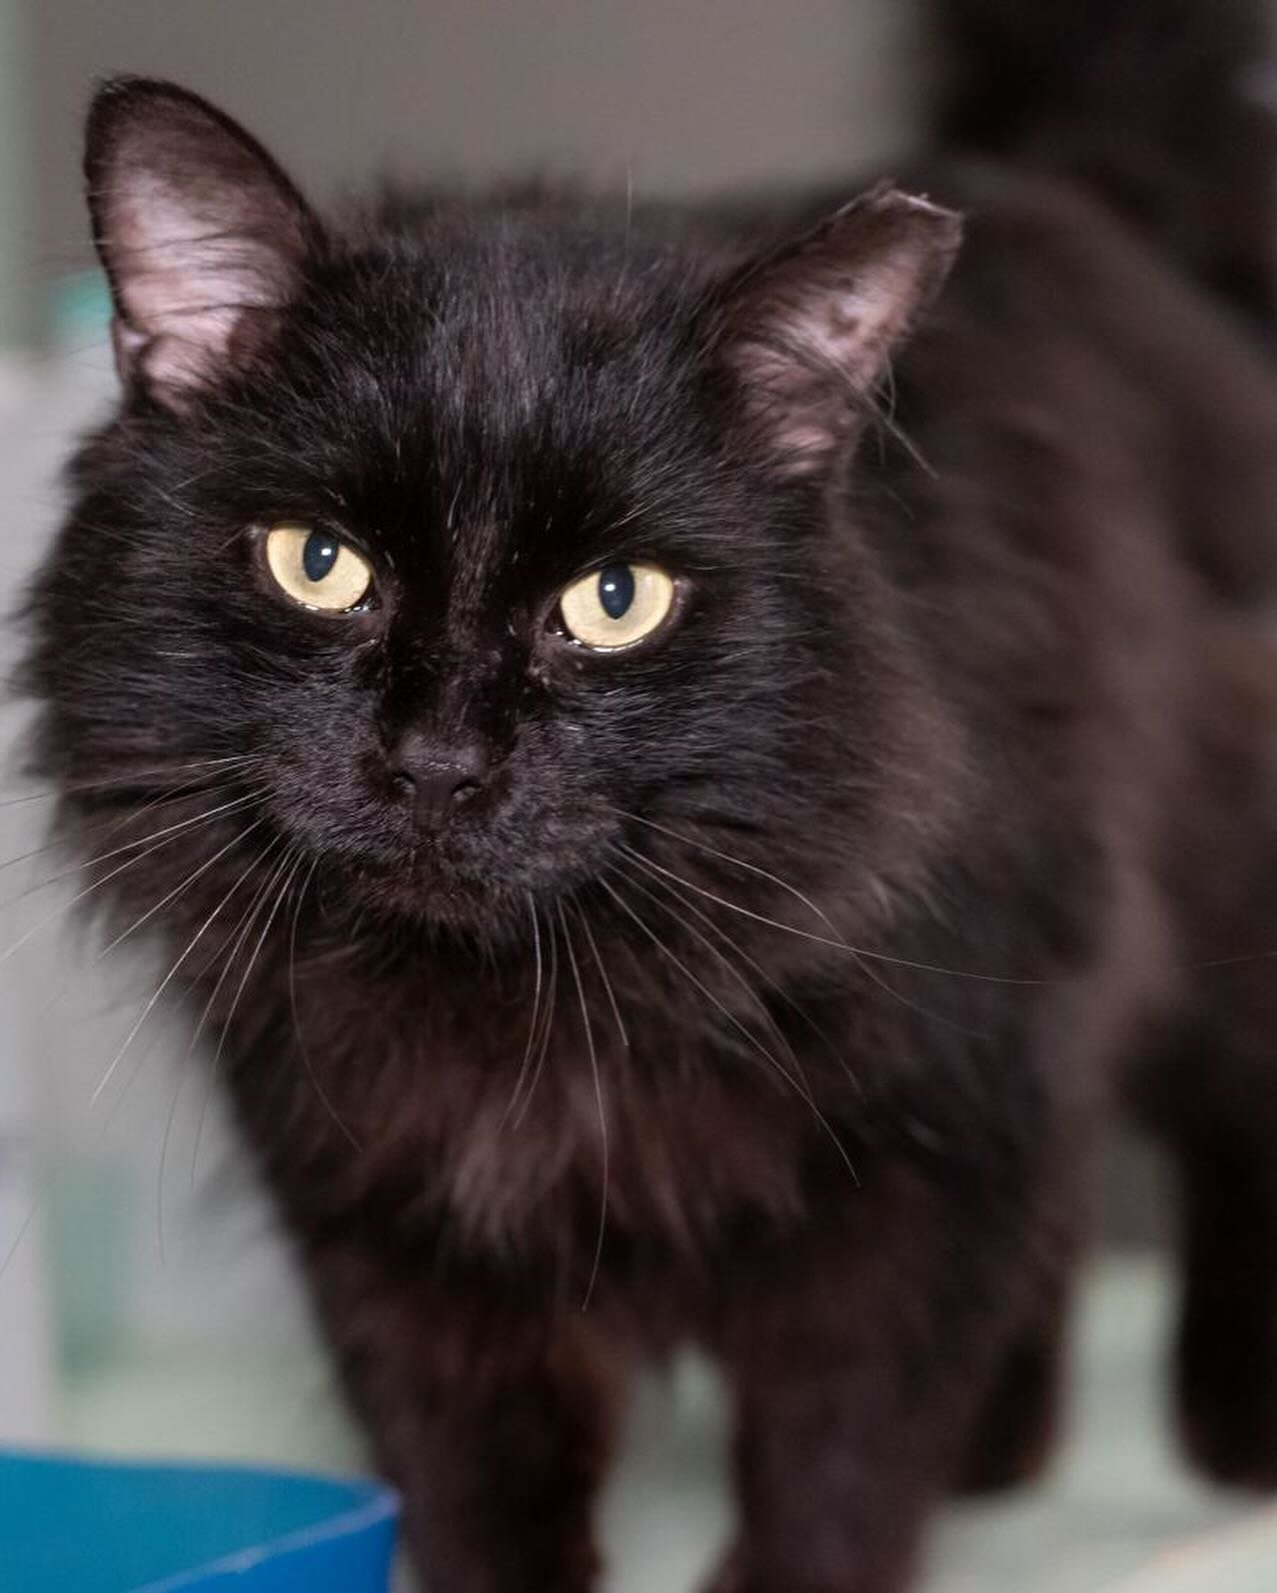 ✨NEW KITTY ALERT✨

Yes, James Purrl Jones has entered the lounge!

This distinguished gentleman wants to meet you and is ready for all the snuggles. He loves to be held and showered with attention.😻

Lots of walk-in availability today ... we do have